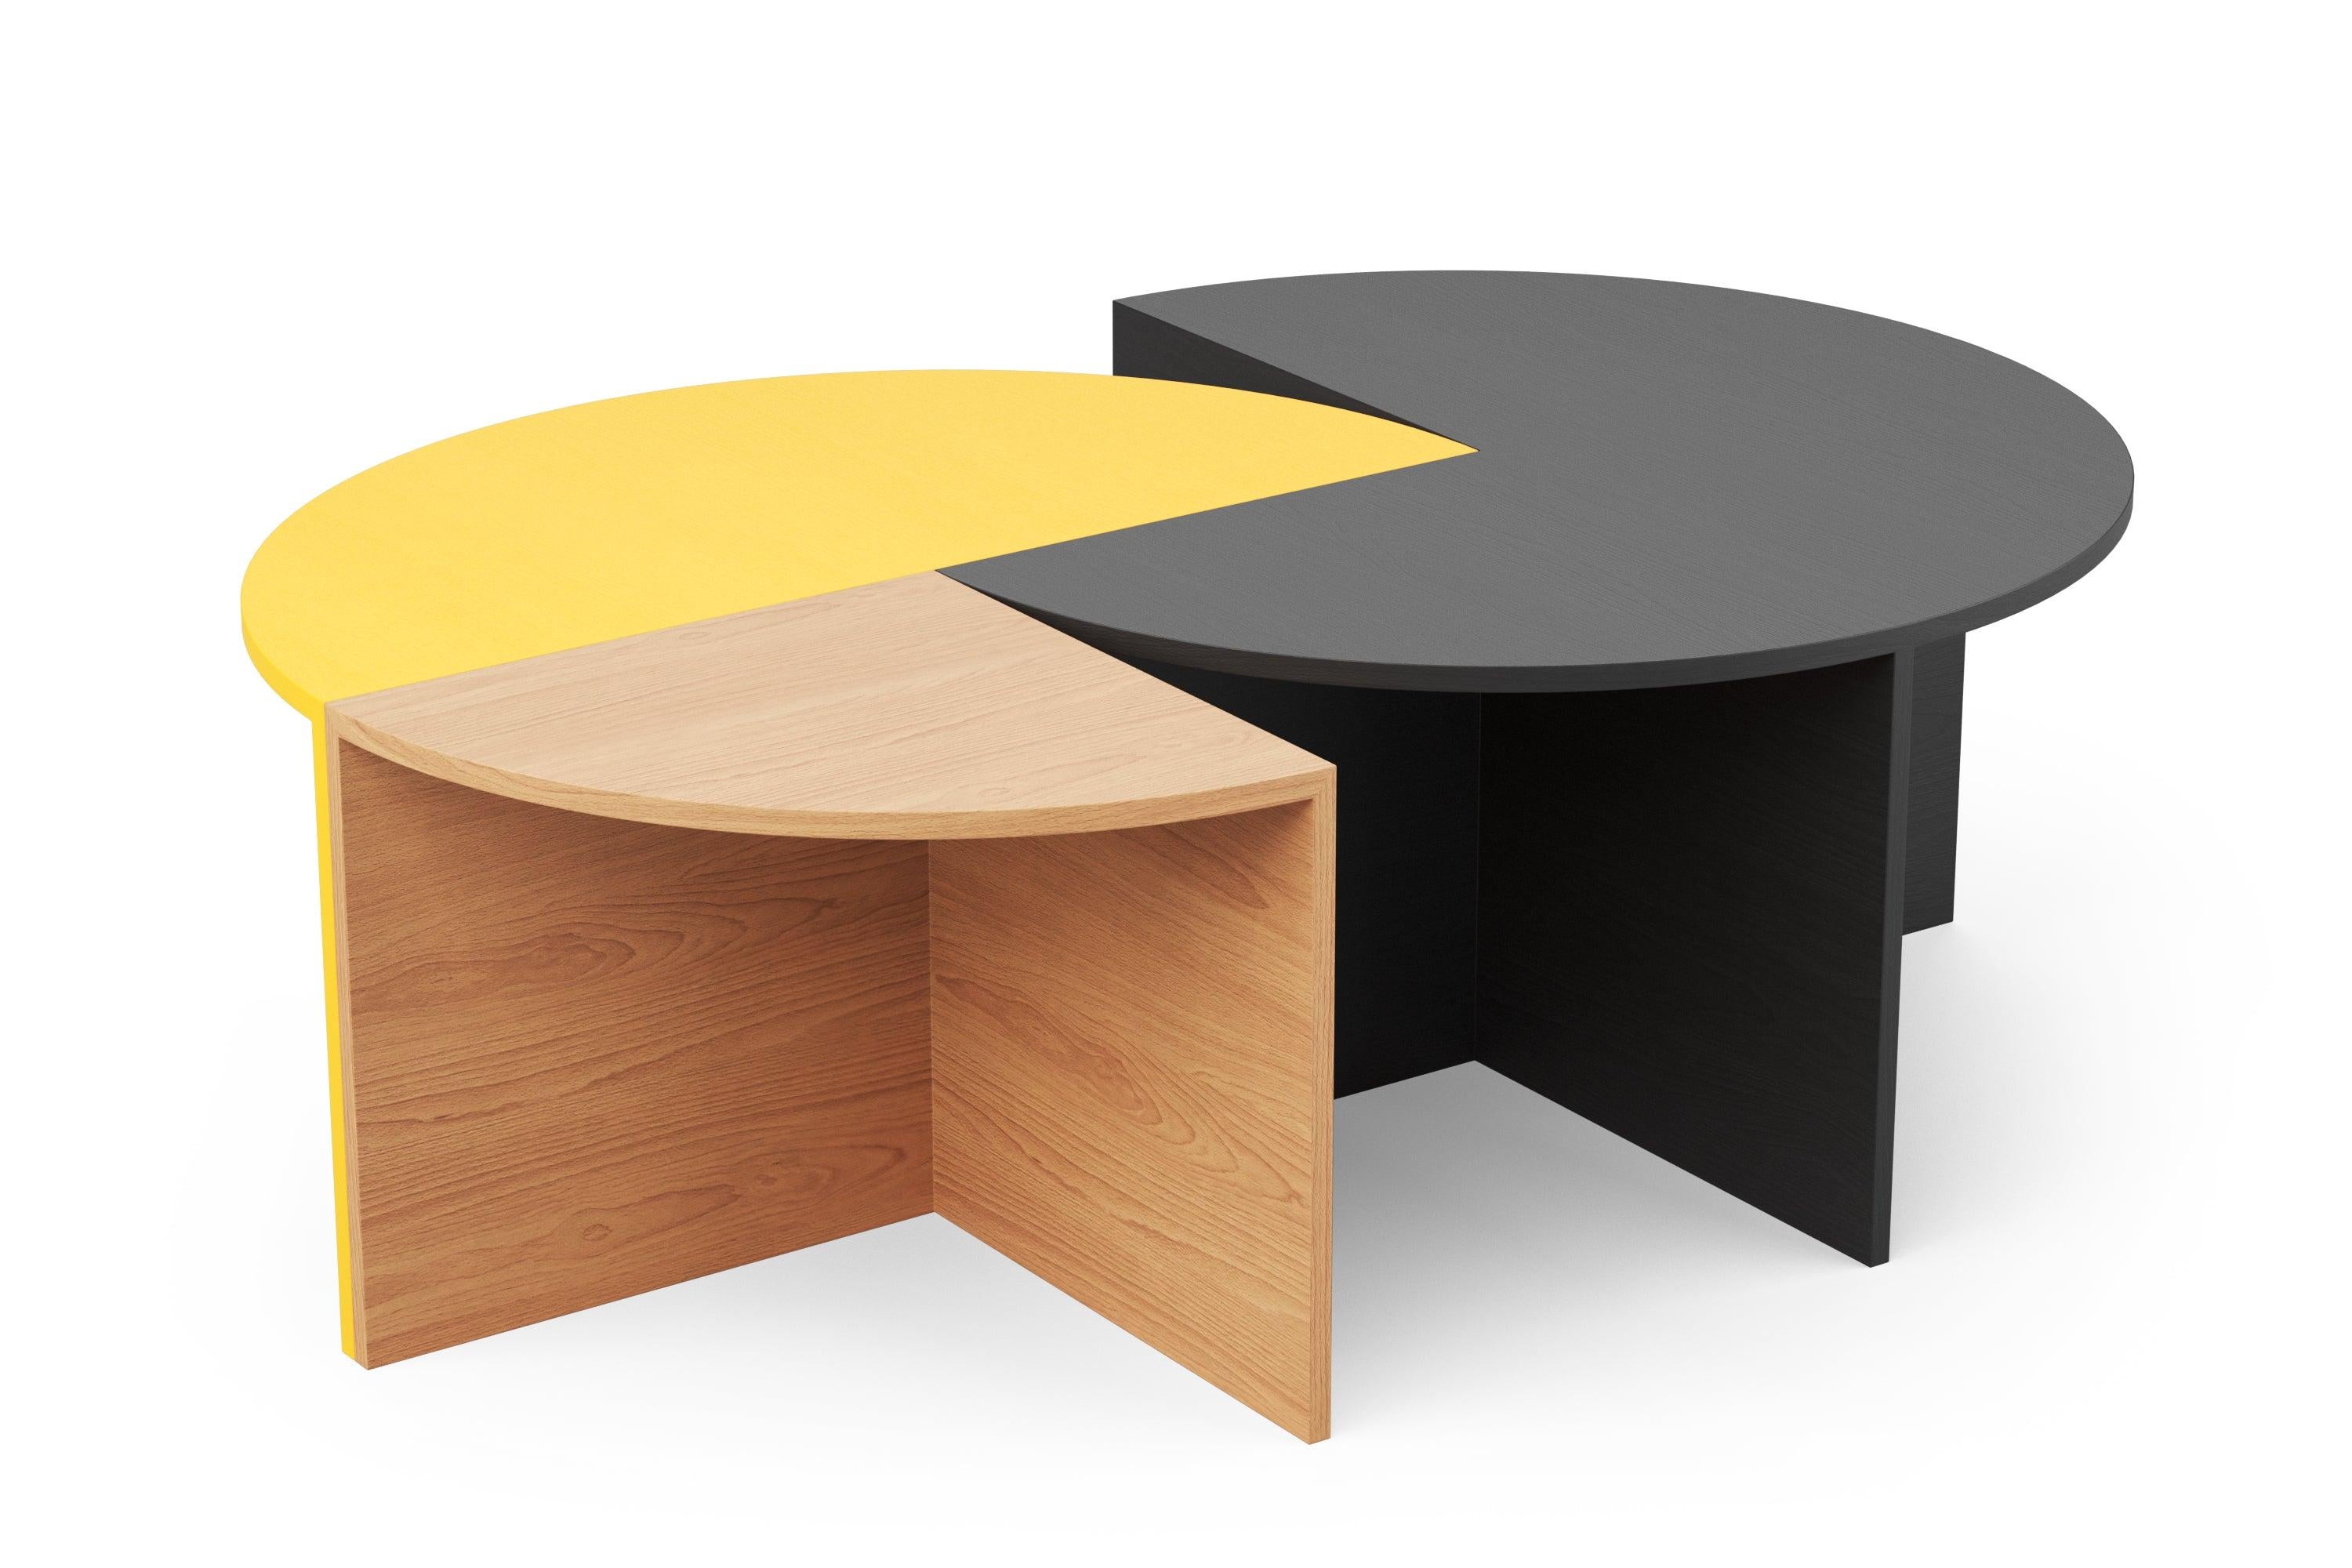 Woodwork Hayche Pie Chart System 1/4 Table, Yellow, Solid Wood, UK, Made To Order For Sale